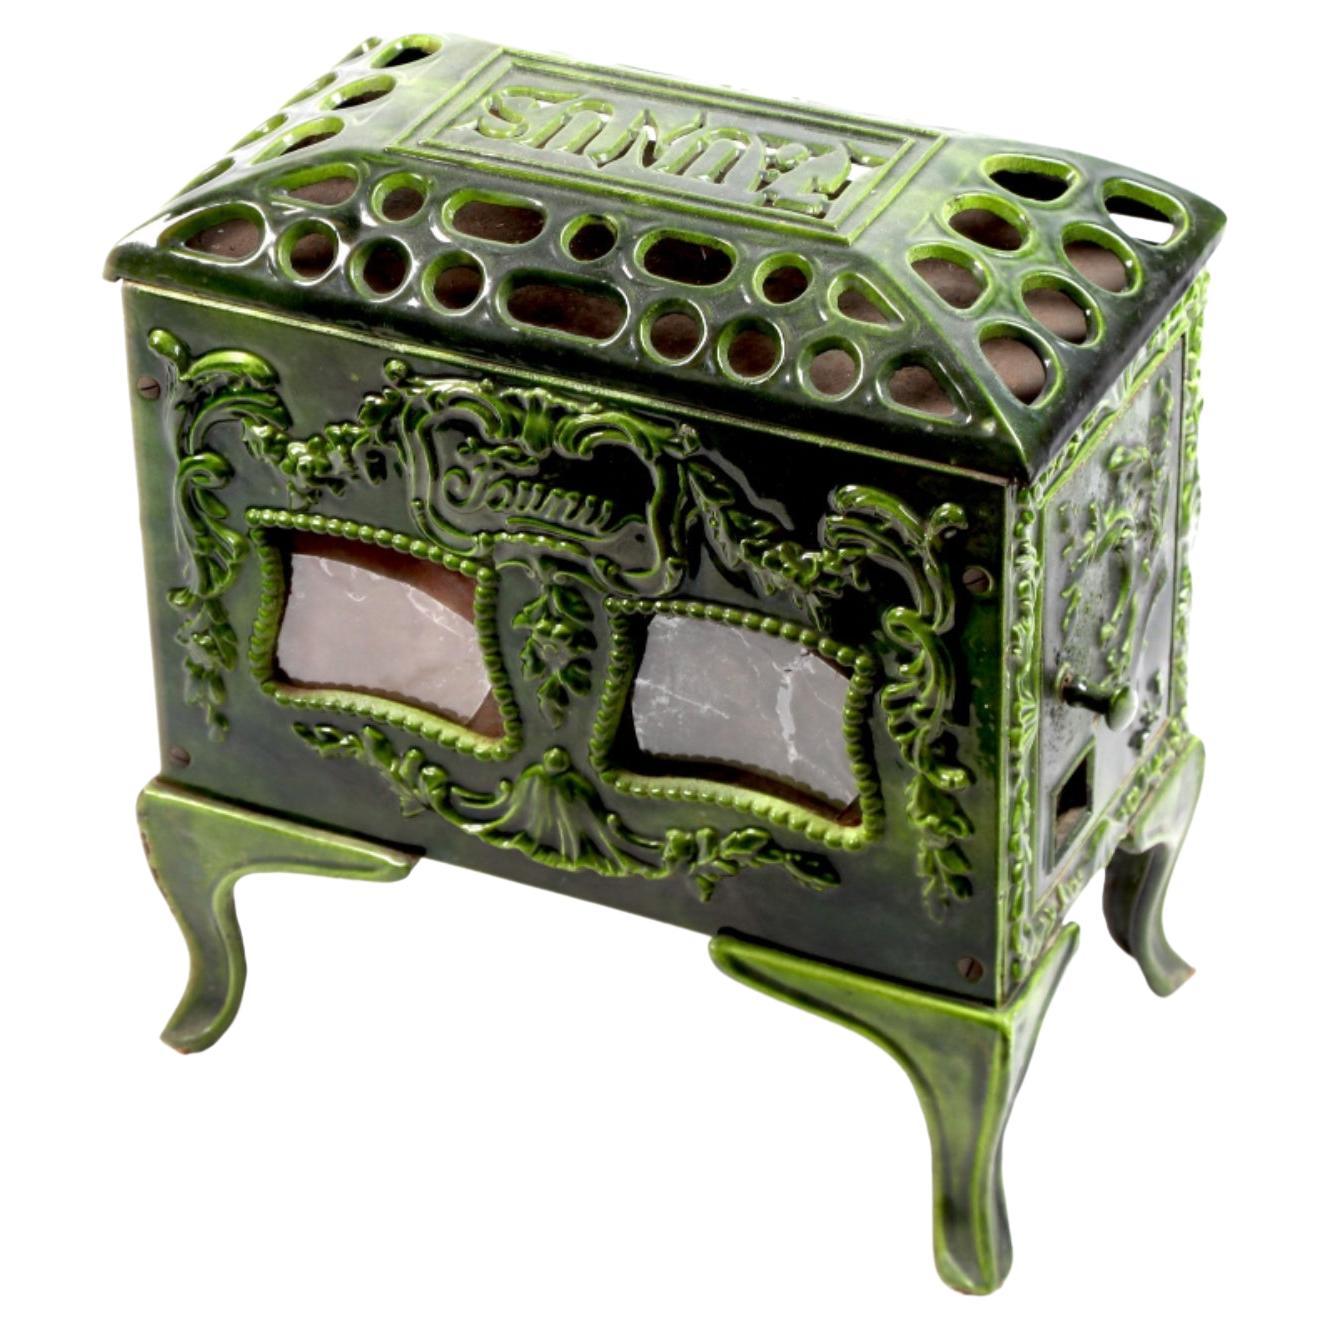 20th Century French Faunus Wood Stove in Green Ceramic with Great Decoration For Sale